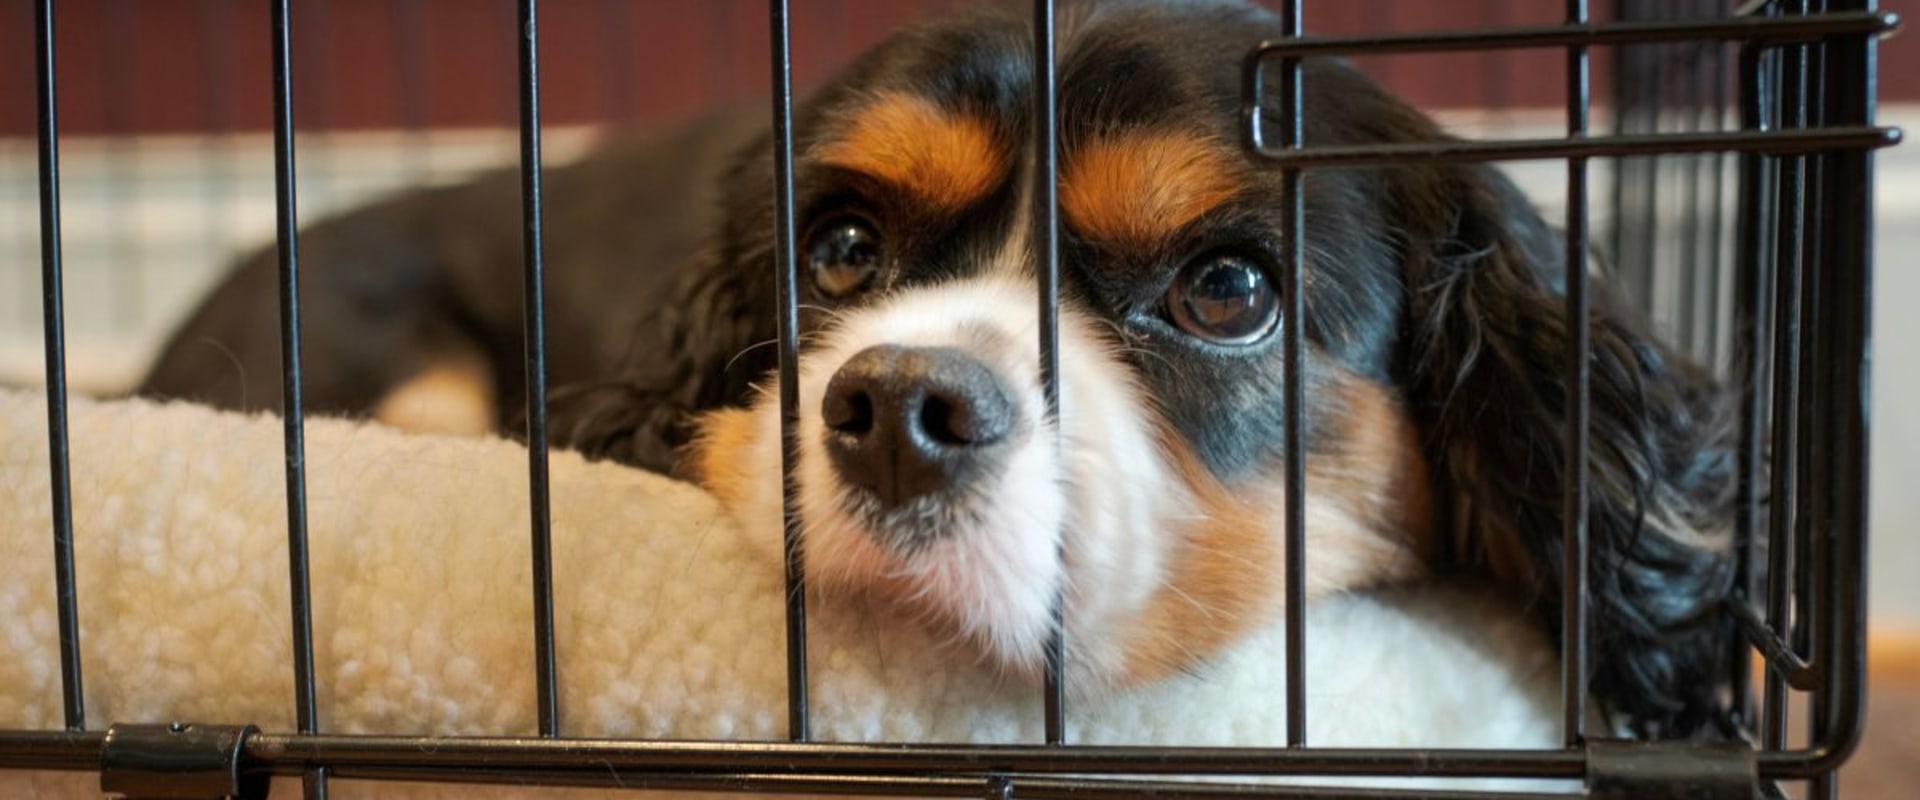 Are there any special dietary requirements that can be accommodated by a dog kennel service?